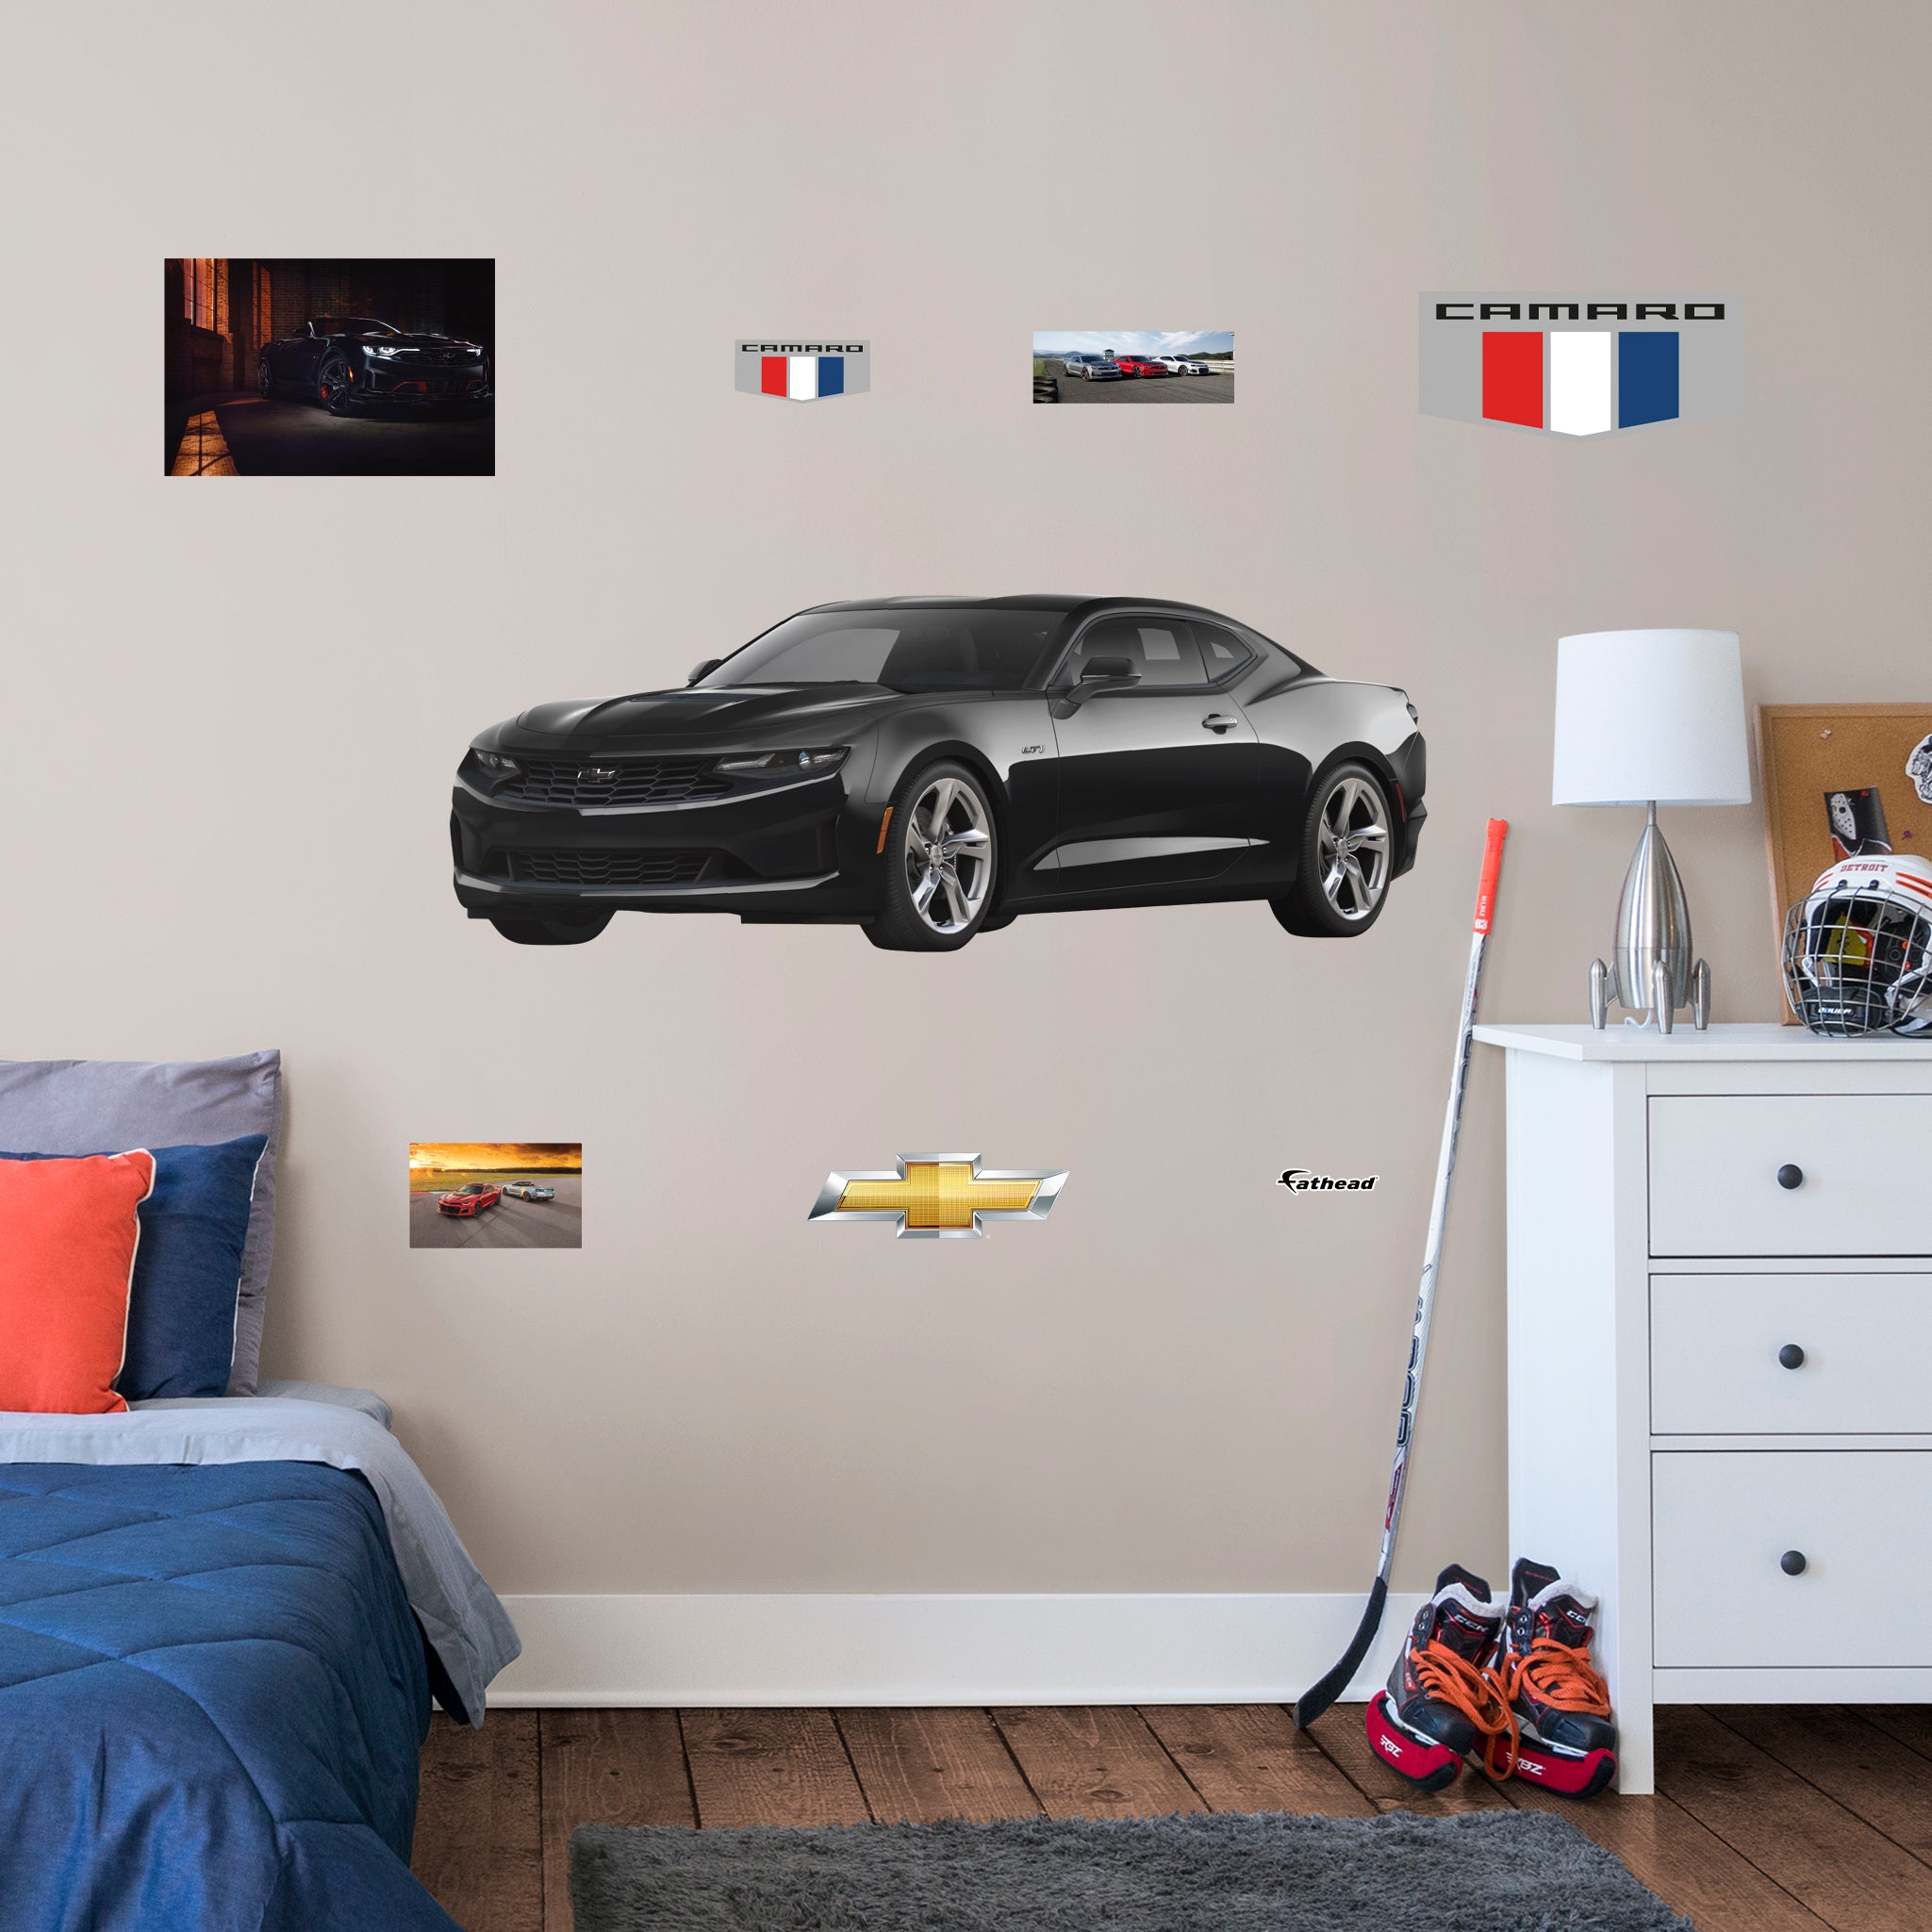 Chevrolet Black Camaro: Officially Licensed GM Removable Wall Decal Life-Size + 7 Decals by Fathead | Vinyl